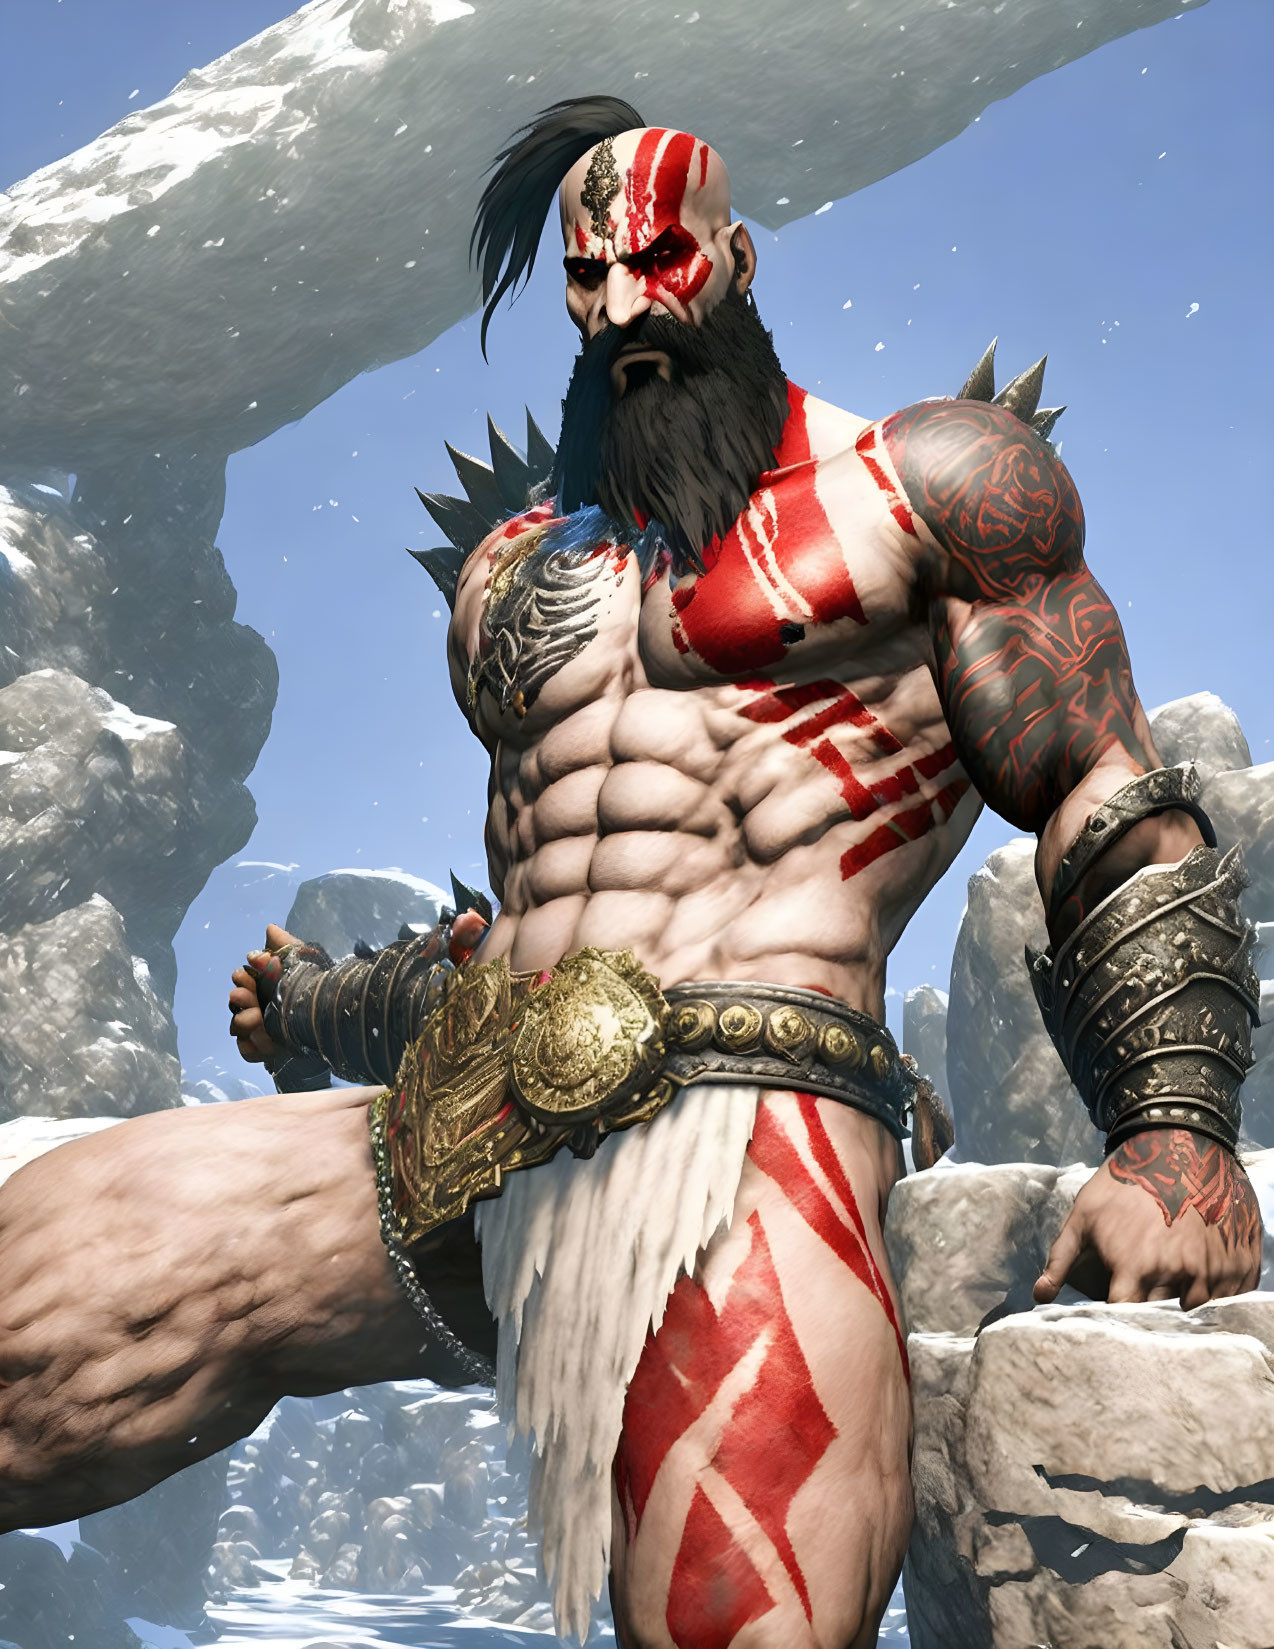 Muscular bearded character with face paint and tattoos in snowy setting